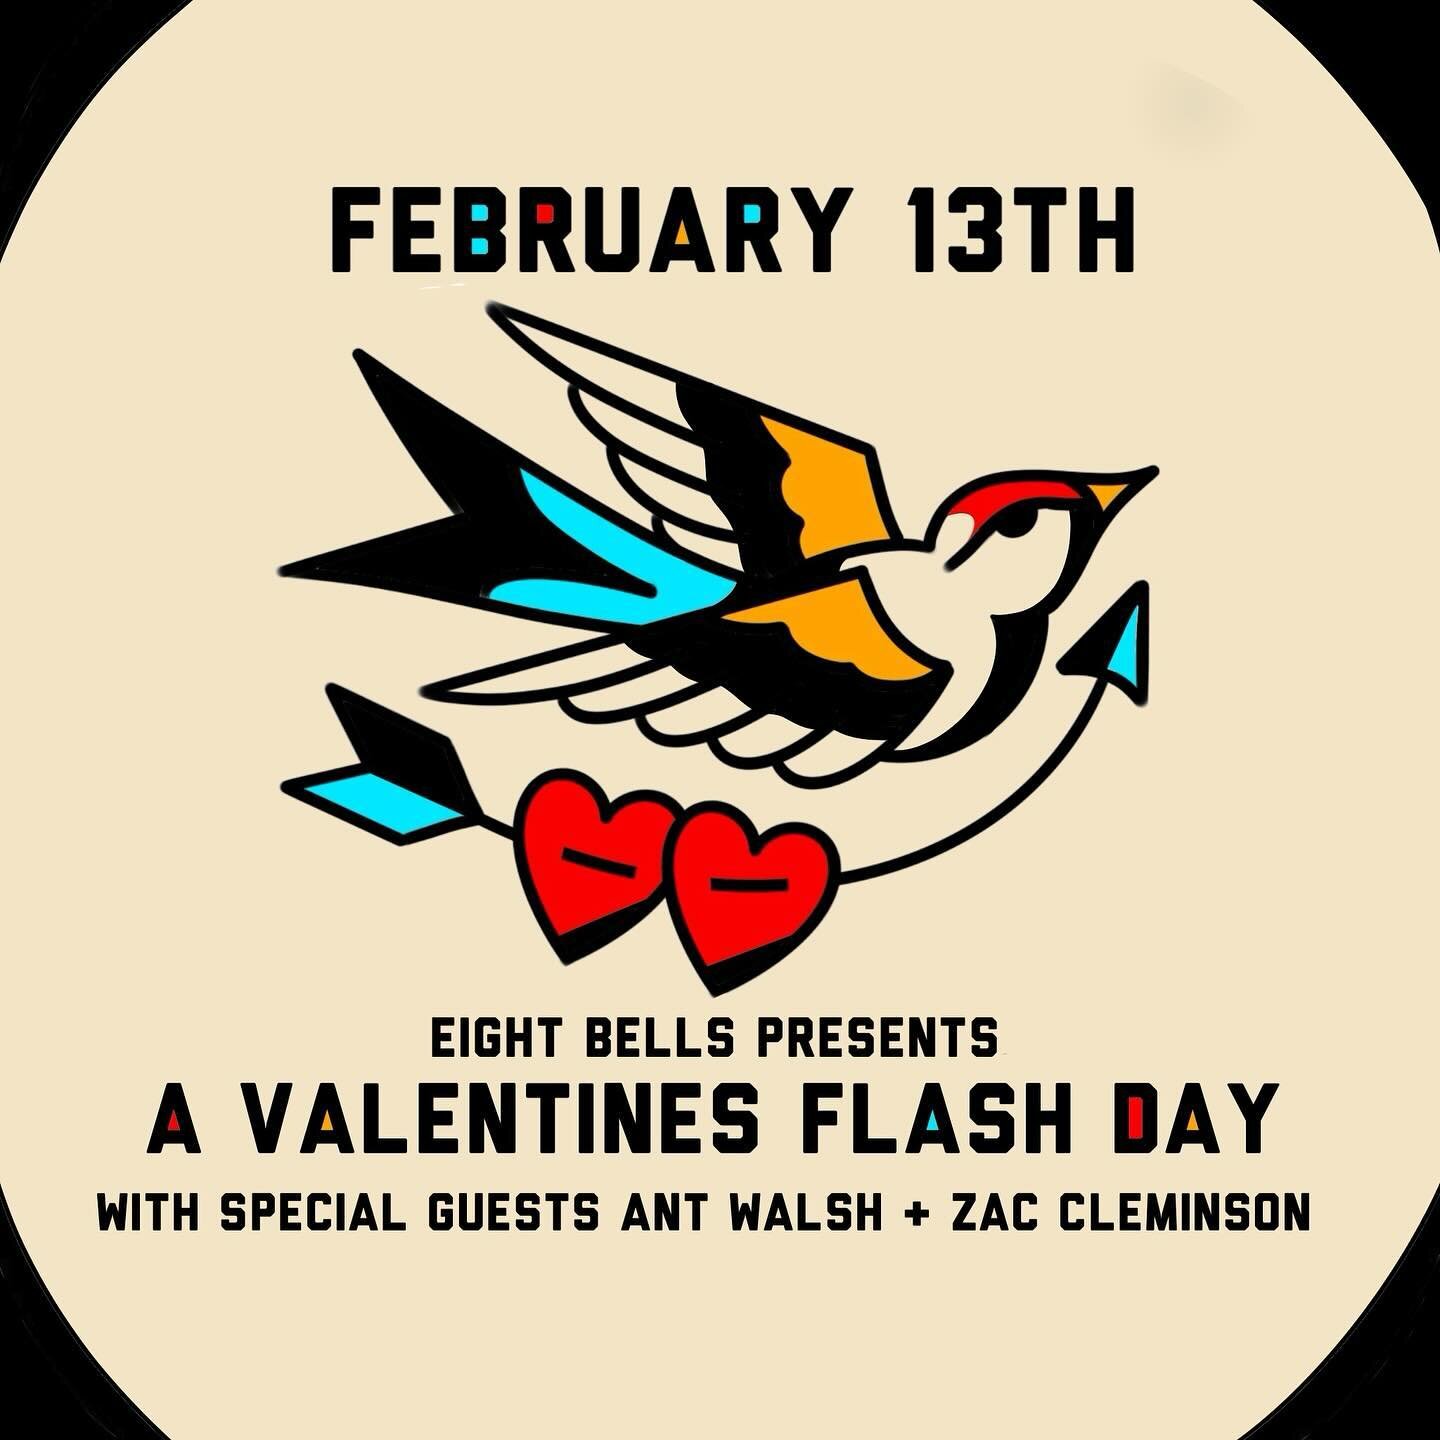 (Repost due to typo!) We have TWO flash days coming up in February! On February 13th we have special guests @ant.goodtime and @zclemtattoo along with our usual crew for our Valentines flash day! And on February 16th @sadboykurt is coming back for a h